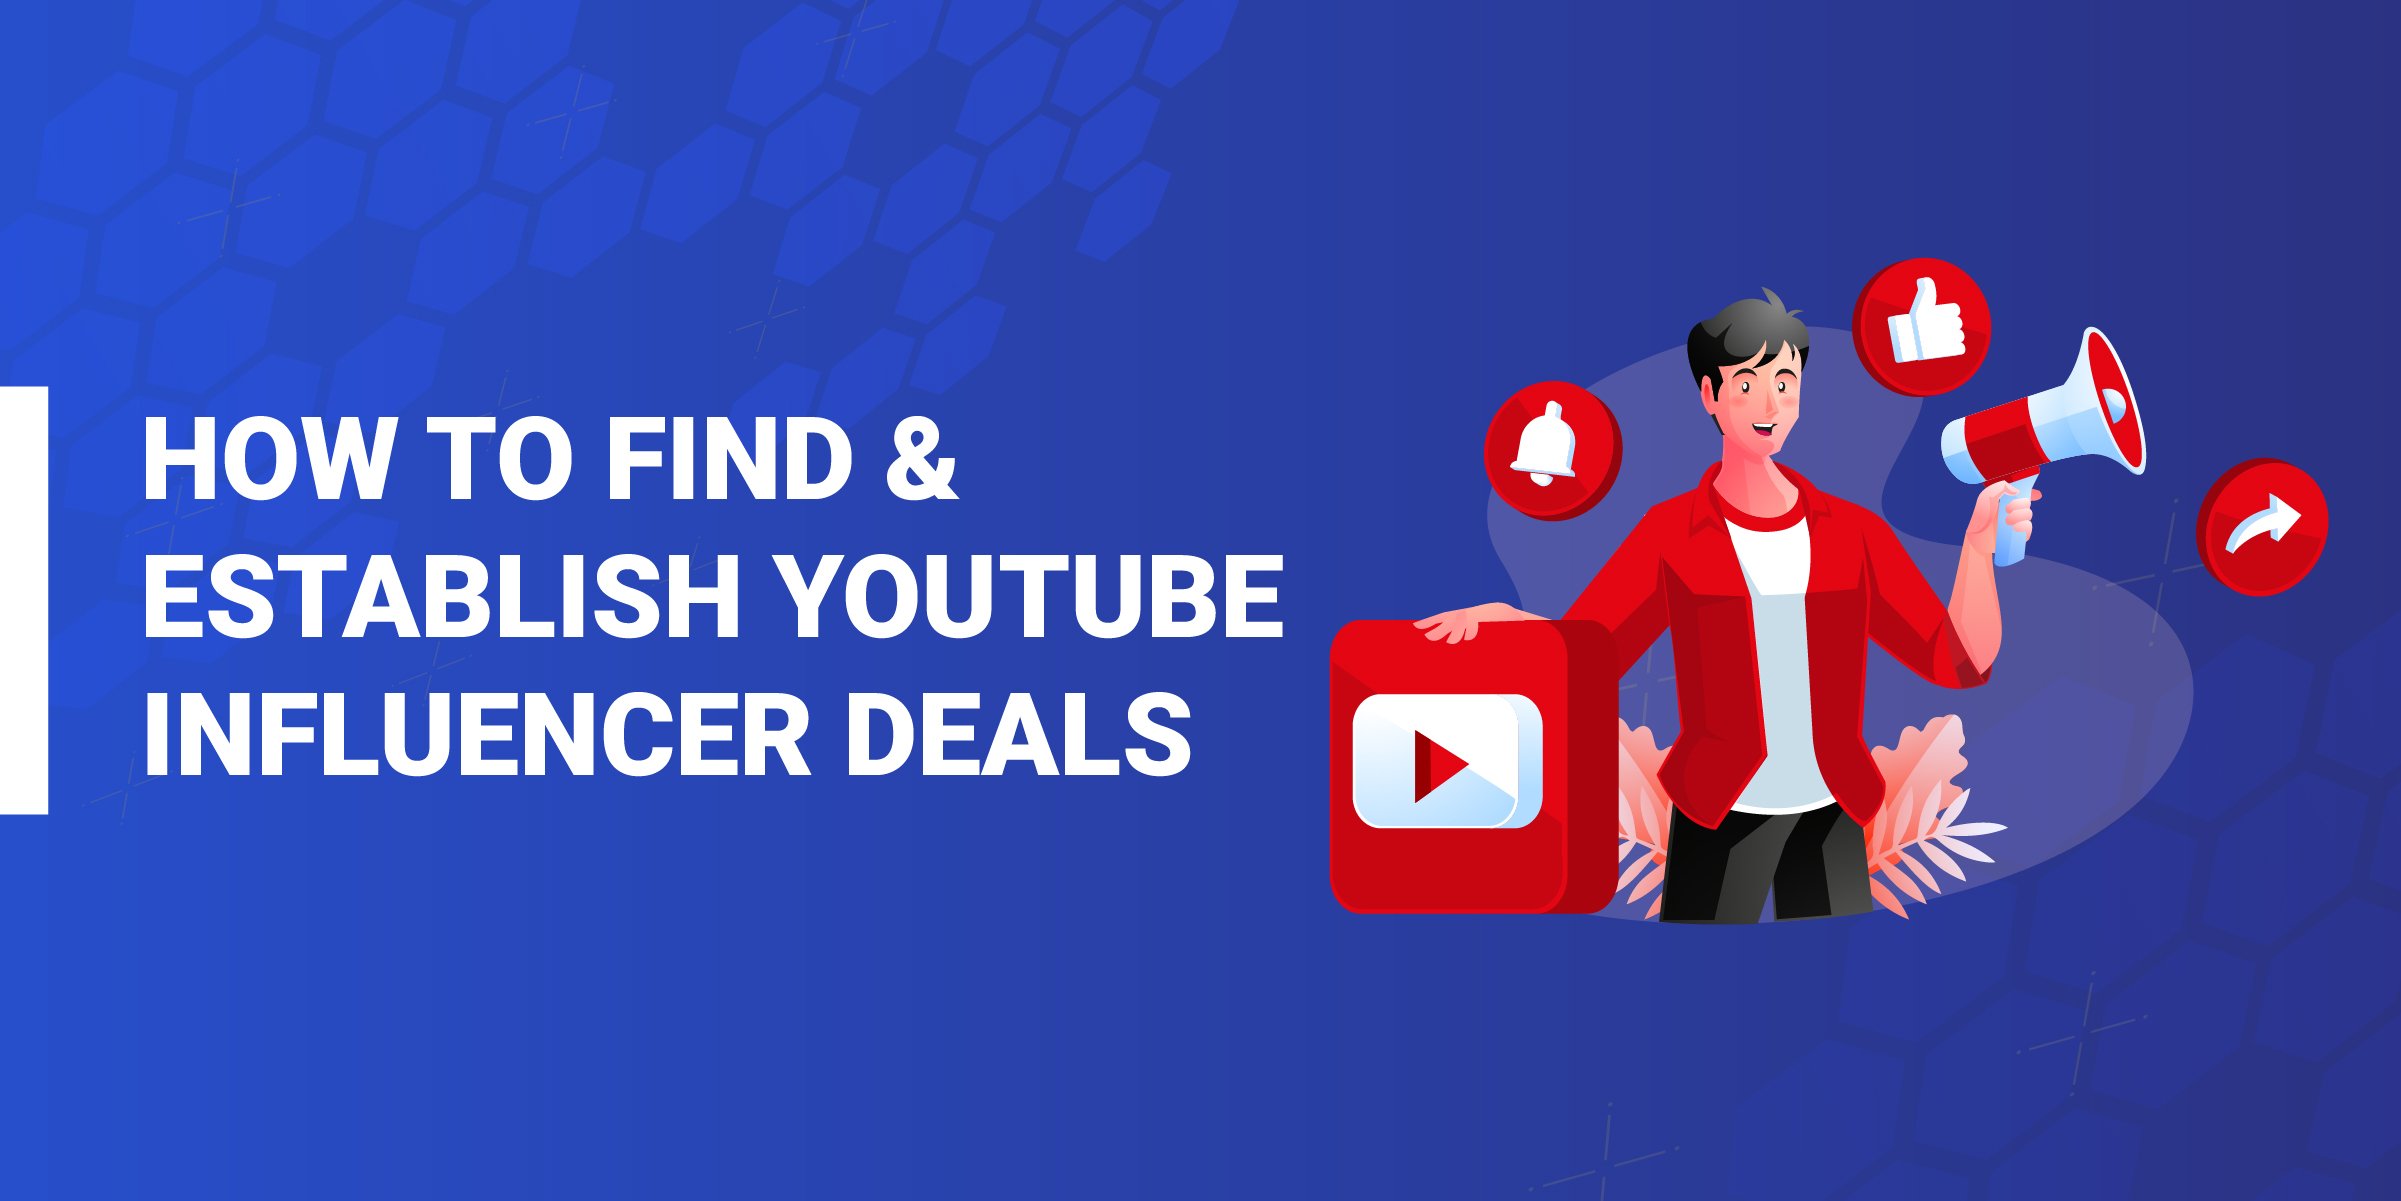 How to Find YouTube Influencer Deals